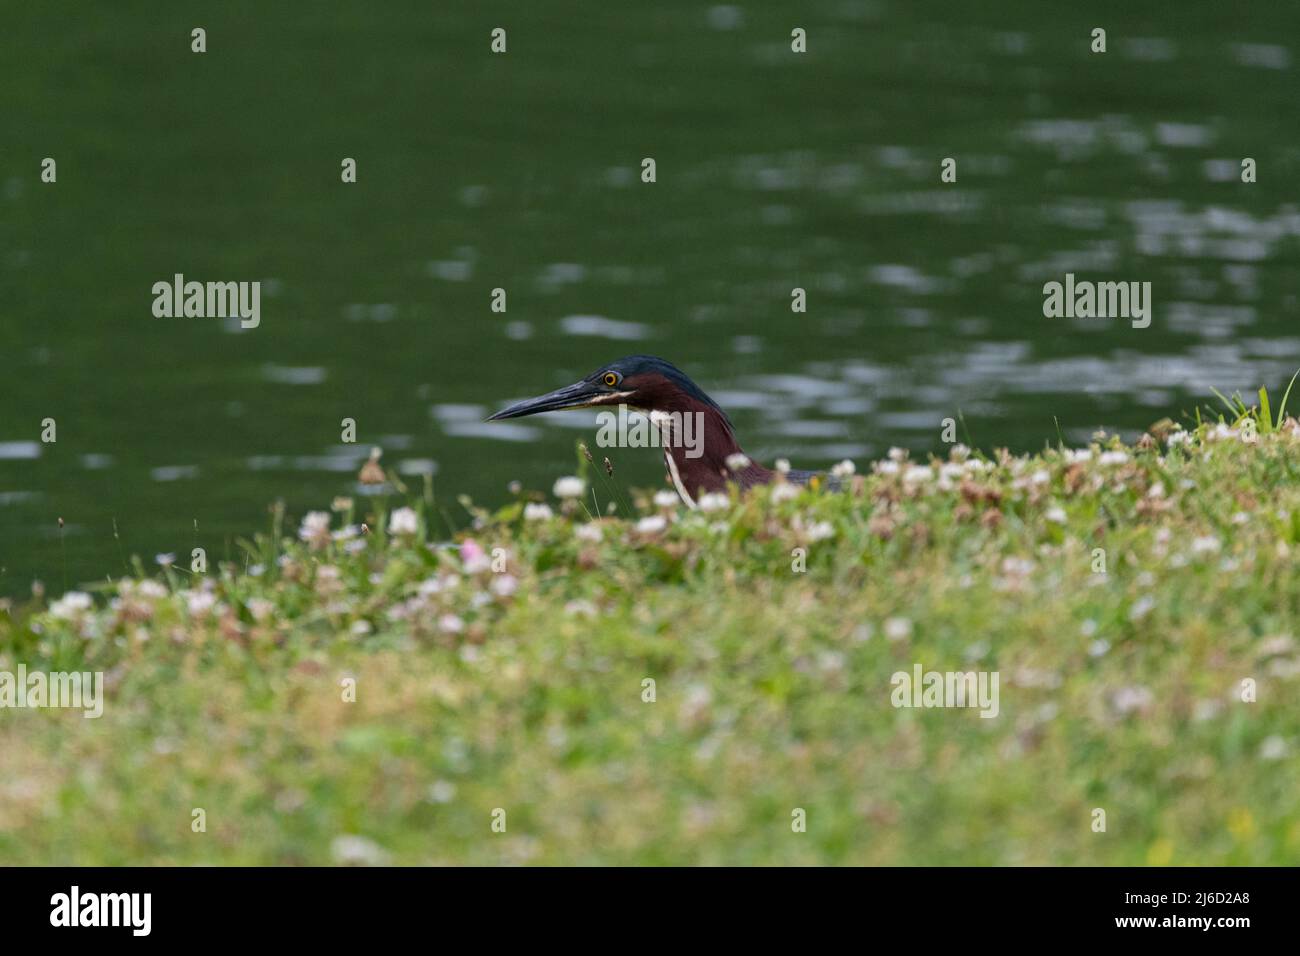 Profile of the head of a beautiful Green Heron sticking up from behind a small rise on the shore of a pond as it searches for food. Stock Photo